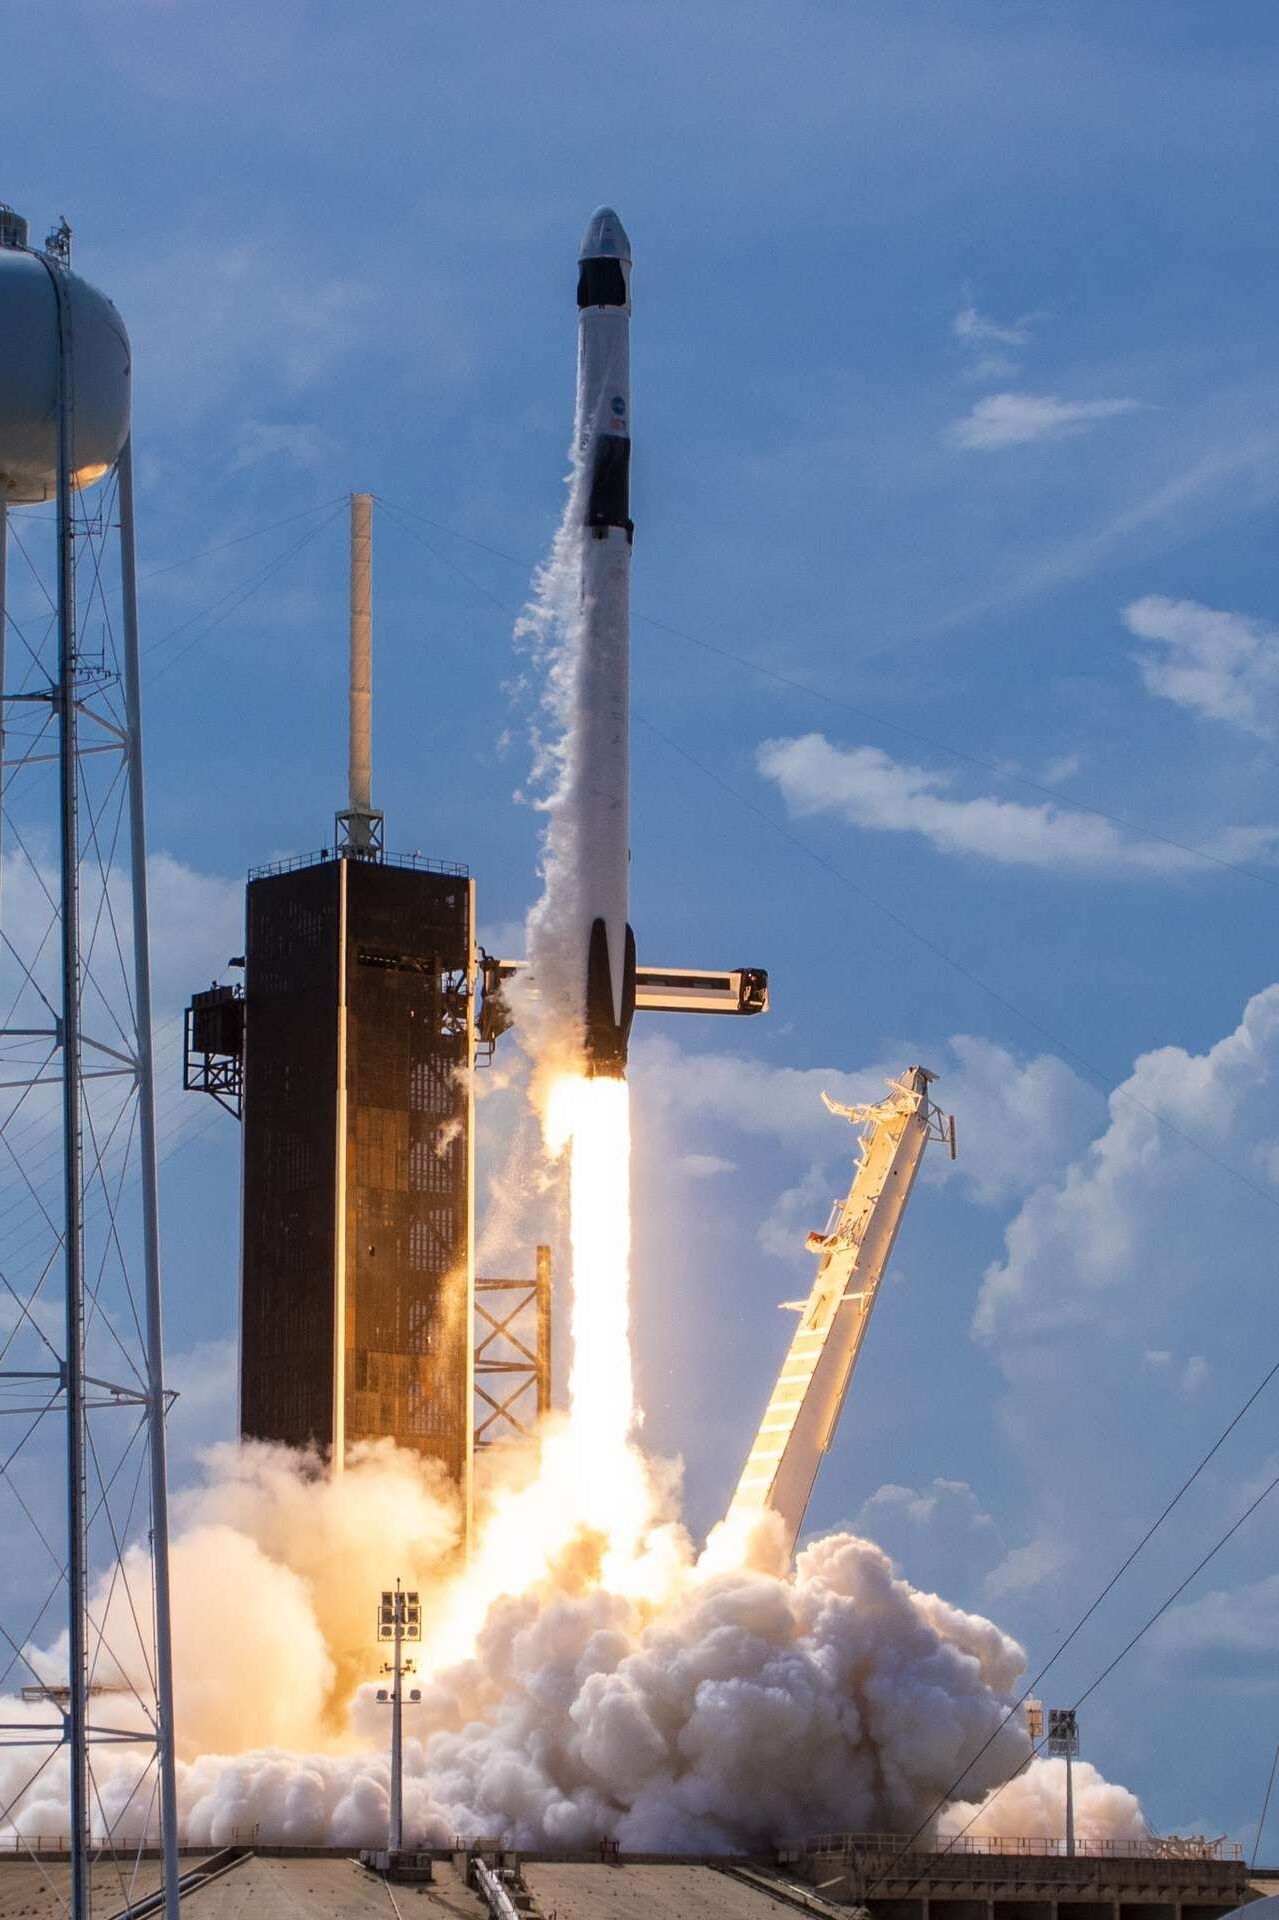 SpaceX: image of the successful launch of Crew Dragon